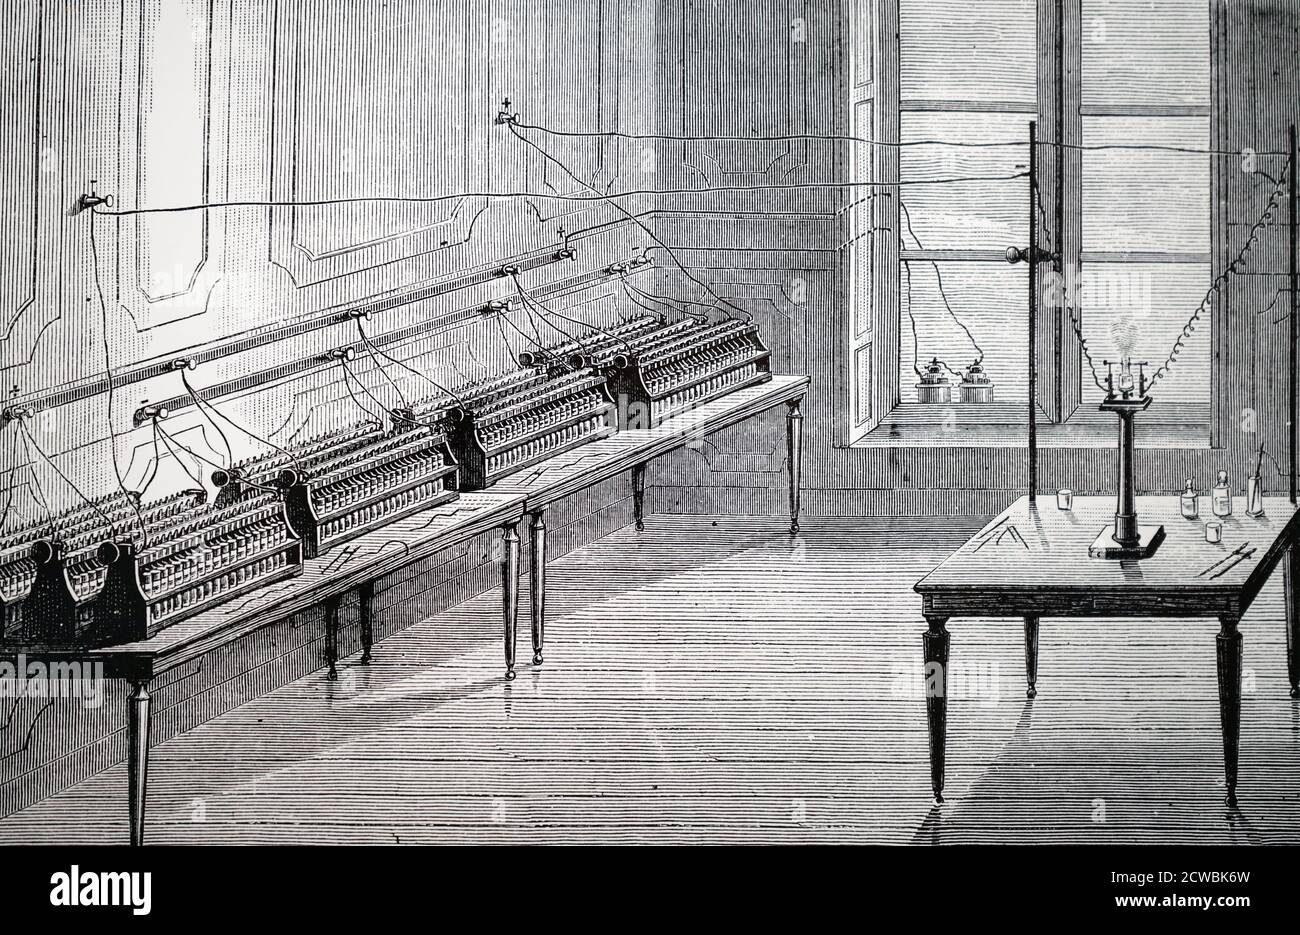 Engraving depicting a secondary battery. Battery of Plante cells (accumulators) of 200 elements. On the widow sill are the two Bunsen cells charging the Plante cells. Stock Photo